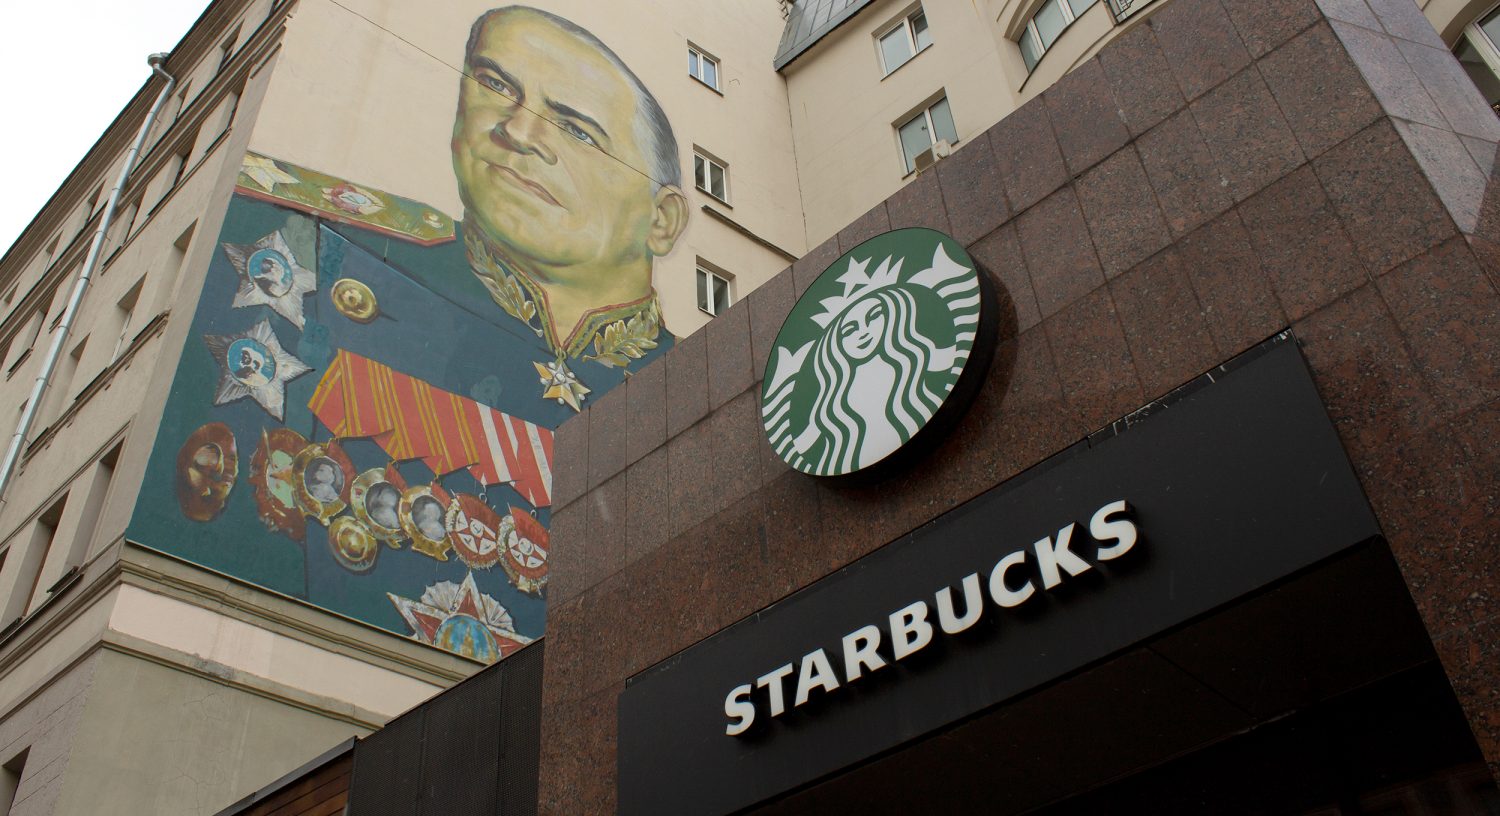 MOSCOW, RUSSIA - 2022/03/27: A Starbucks sign is seen alongside the mural of Georgy Zhukov, a Soviet general and Marshal of the Soviet Union who oversaw some of the USSRâs most decisive victories over Nazi Germany during WWII. (Photo by Vlad Karkov/SOPA Images/LightRocket via Getty Images)